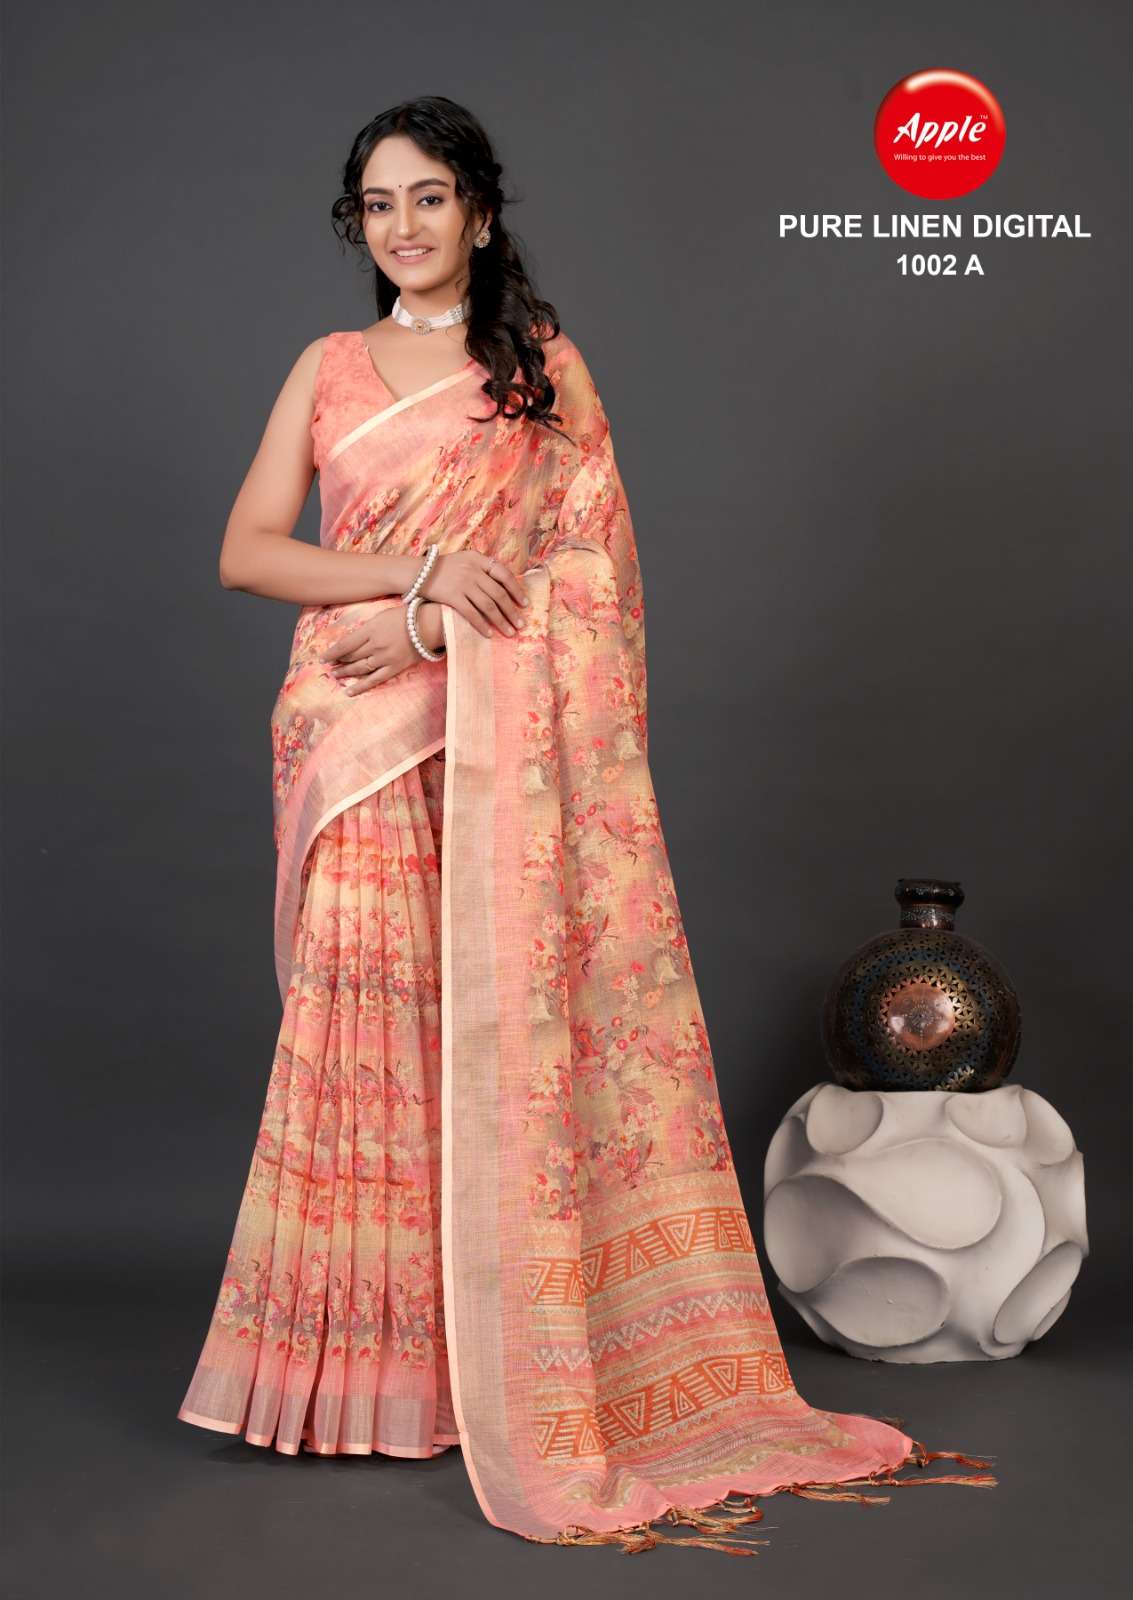 apple pure linen digital 1002 printed 4 colour matching saree wholesale rate